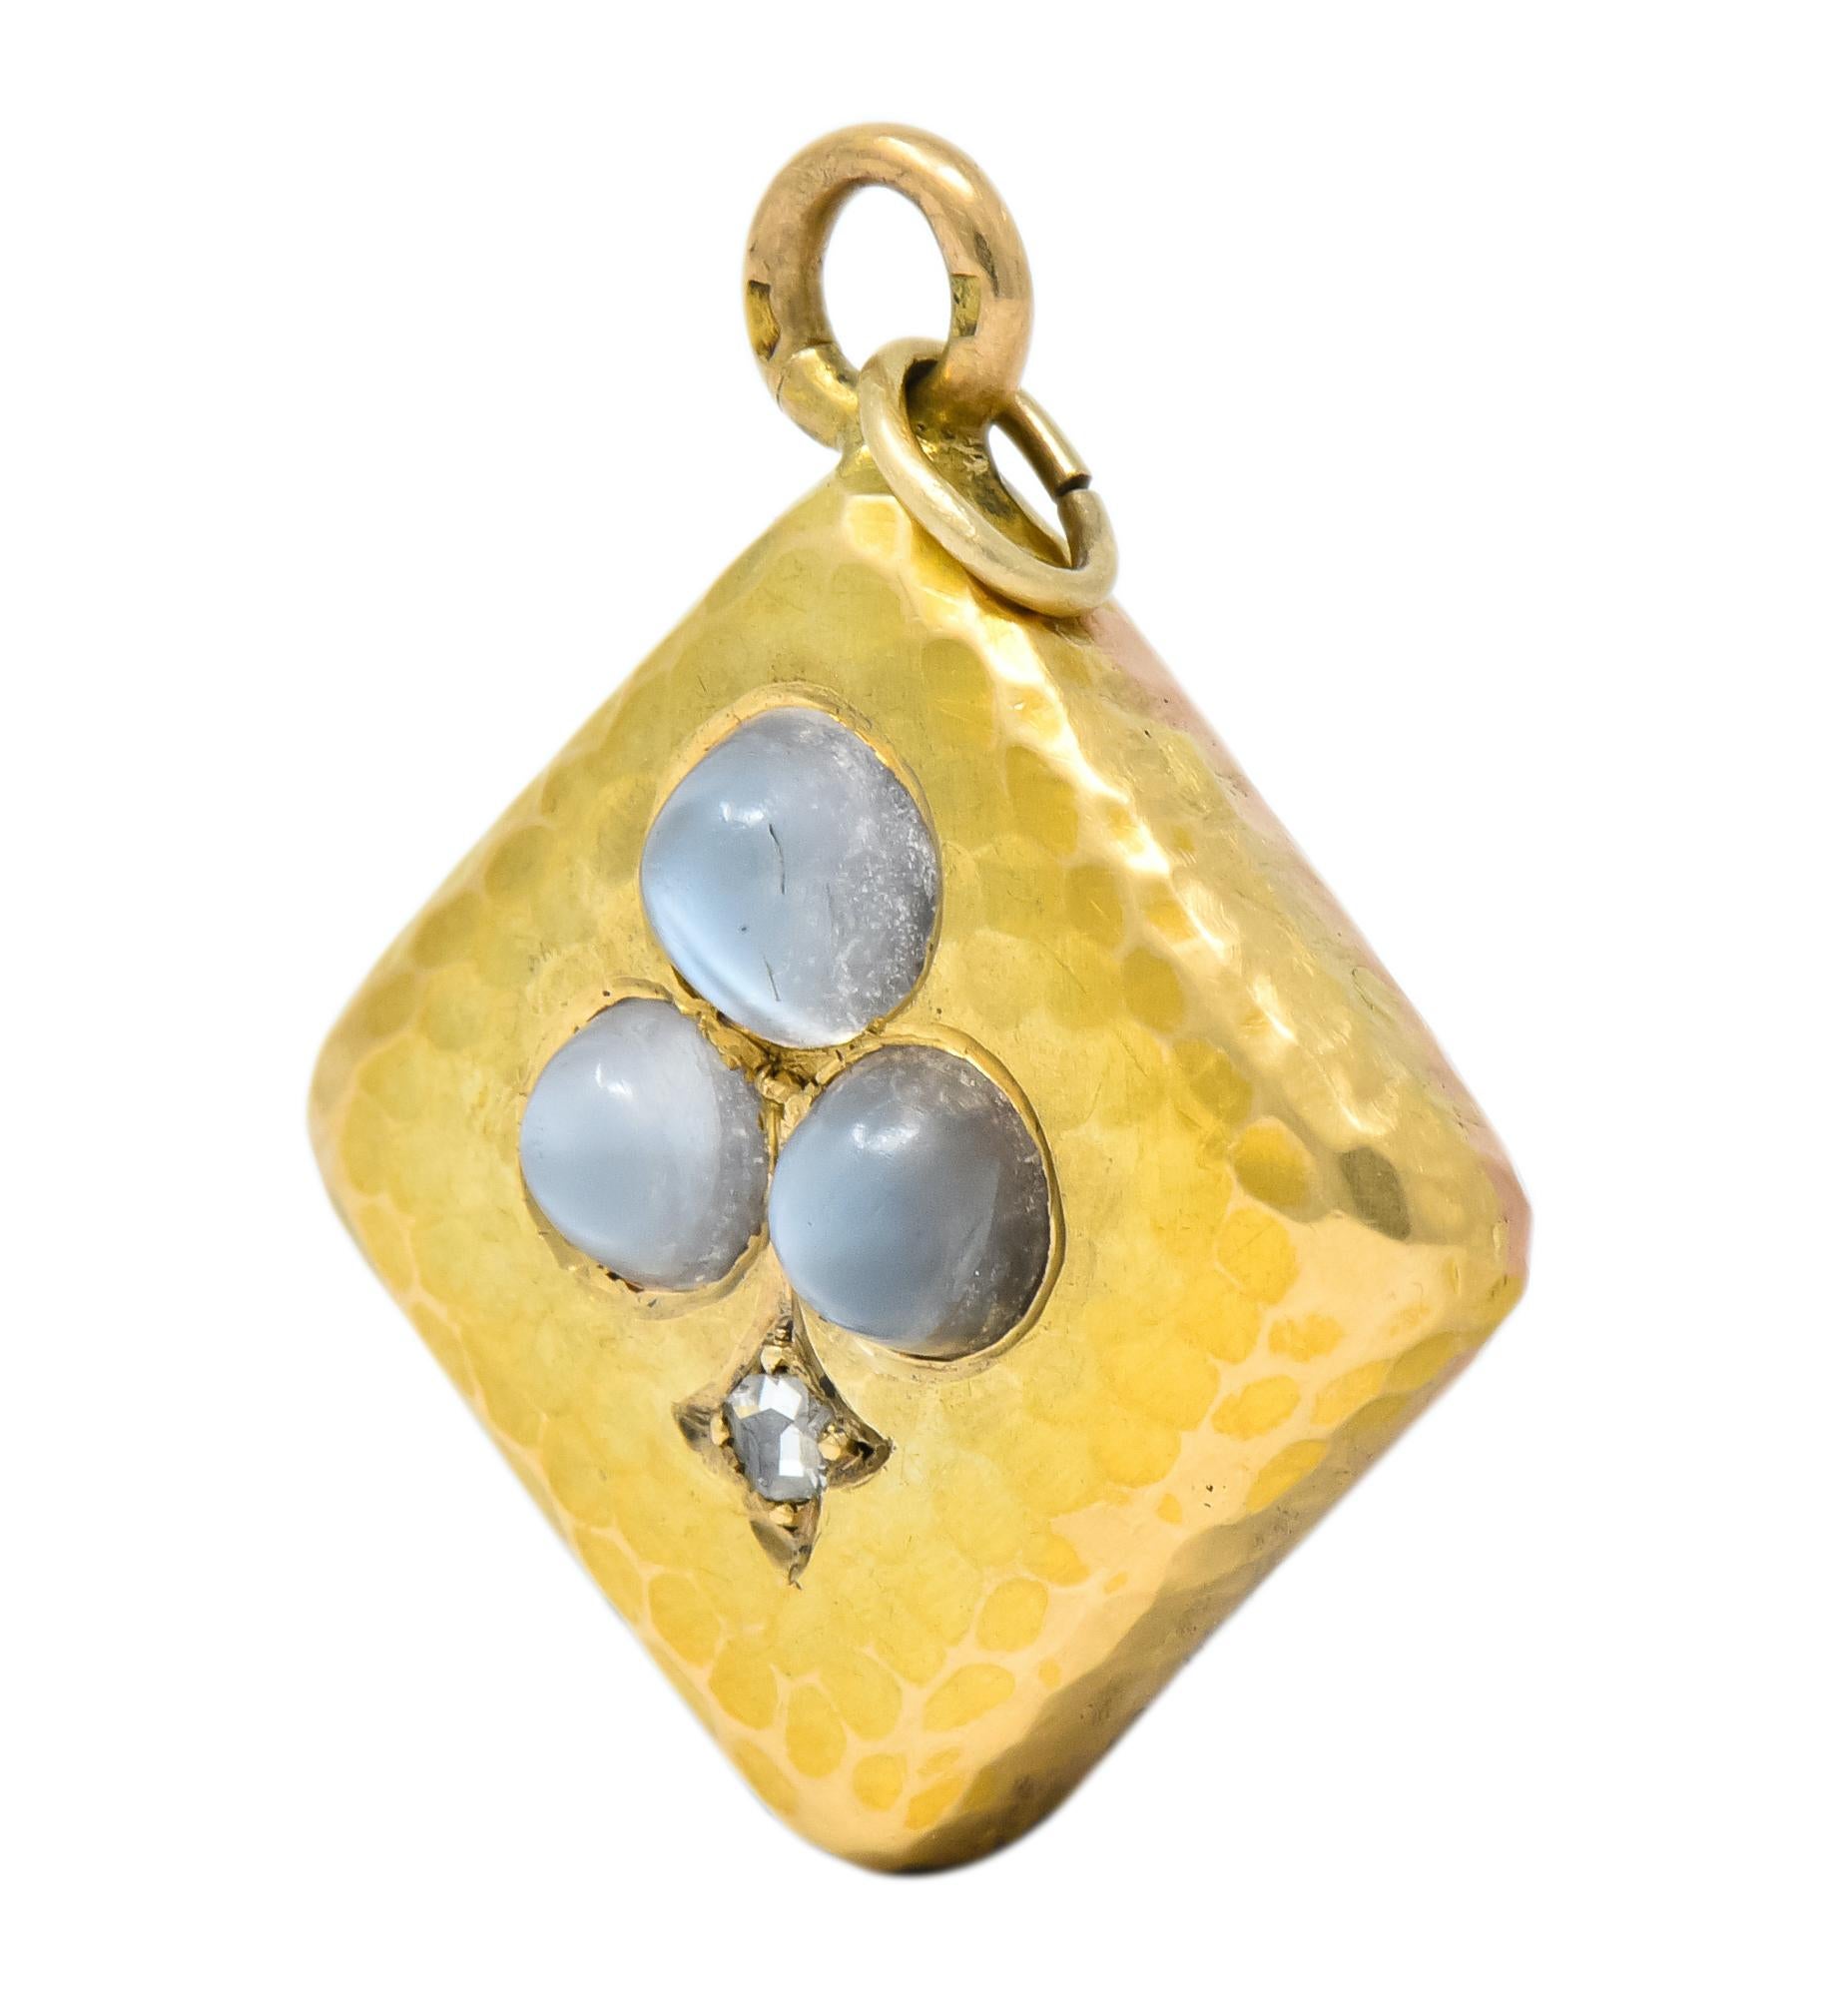 Featuring a square form foundation of mixed finish 18 karat gold with a dimpled surface and bezel set cabochon moonstones in a Spades motif

With a bead set rose cut diamond, eye-clean and white

Completed by a round bale with French assay